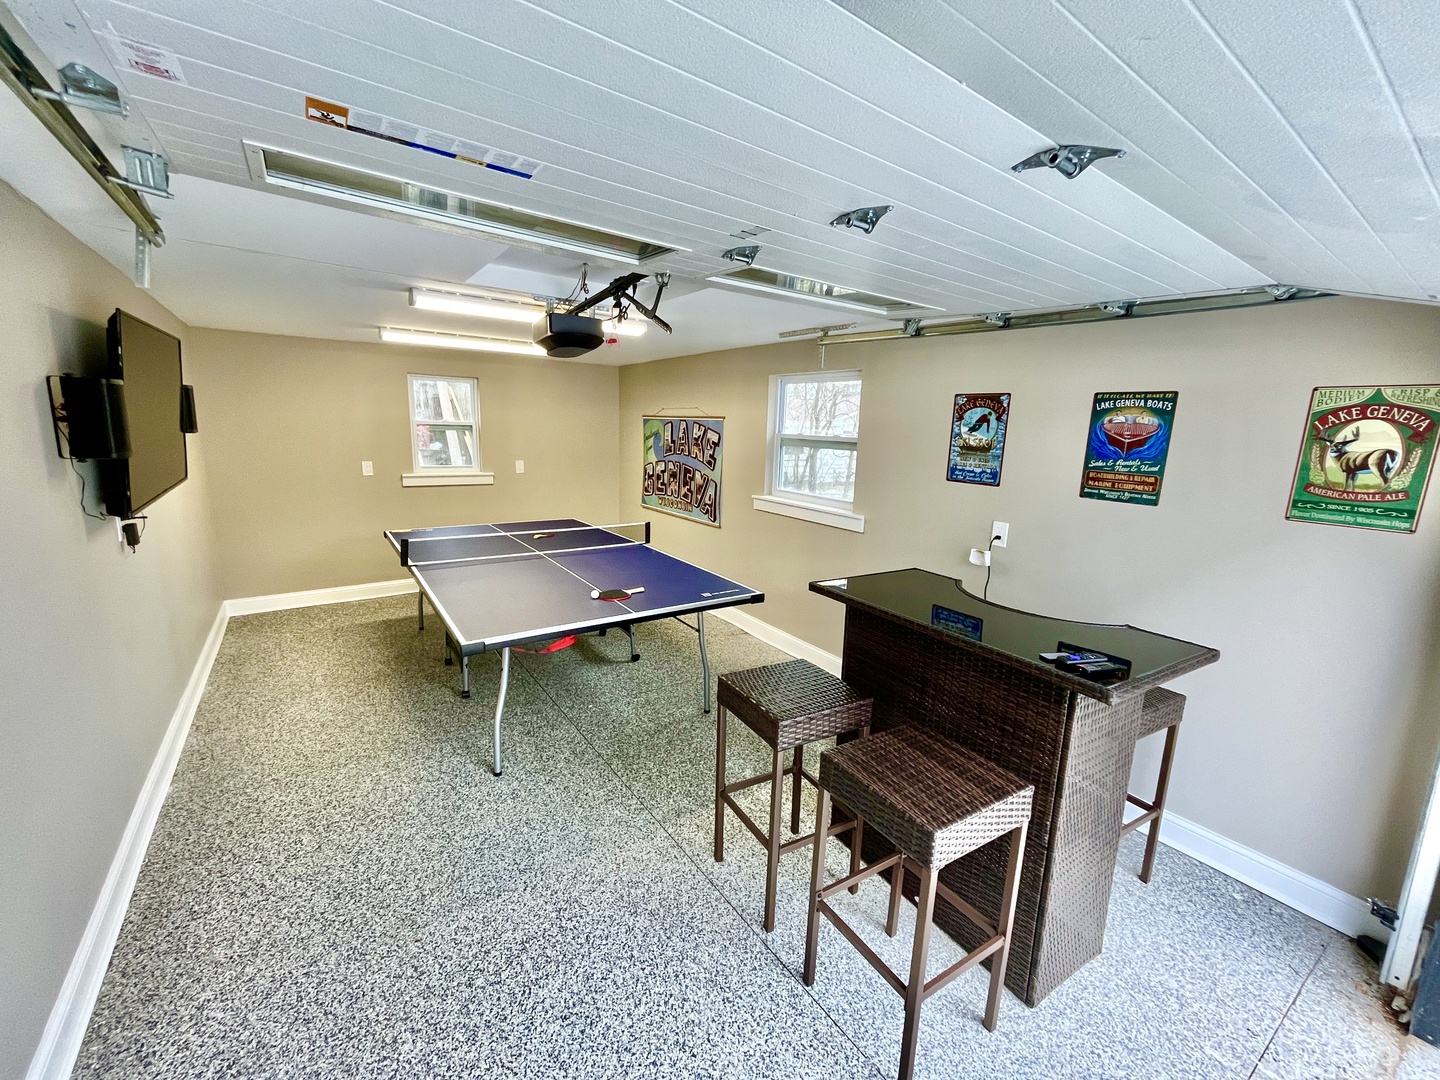 Watch some TV while you play ping pong or enjoy a drink at the bar!